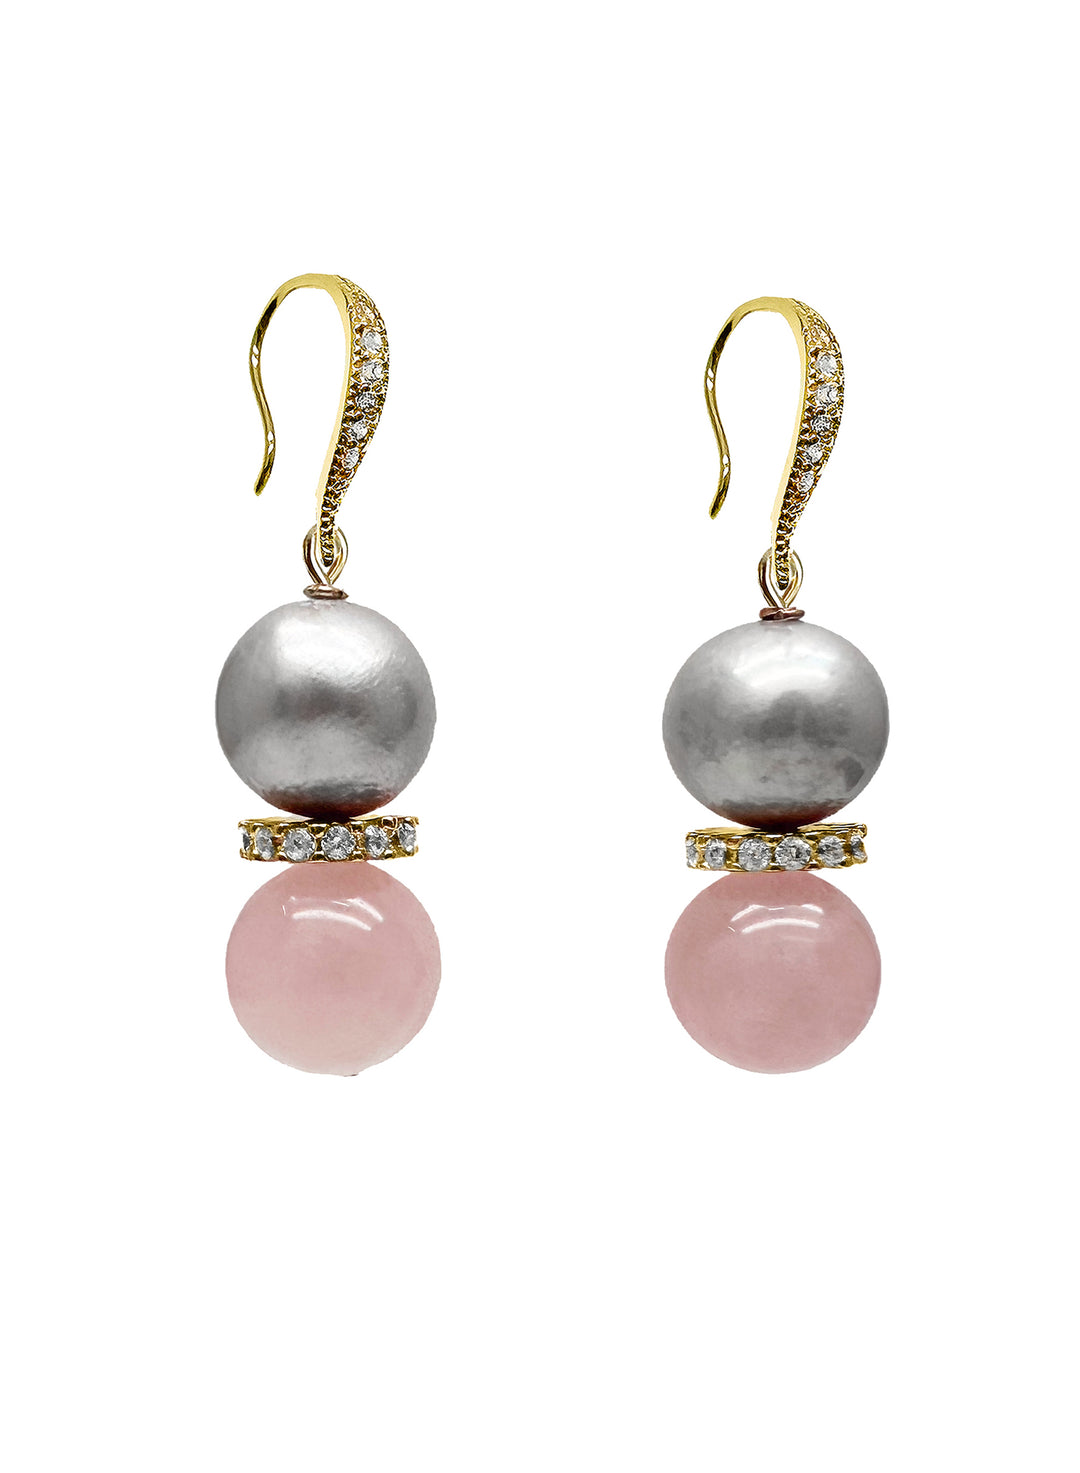 Pink Rose Quartz and Gray Freshwater Pearls Earrings LE004 - FARRA